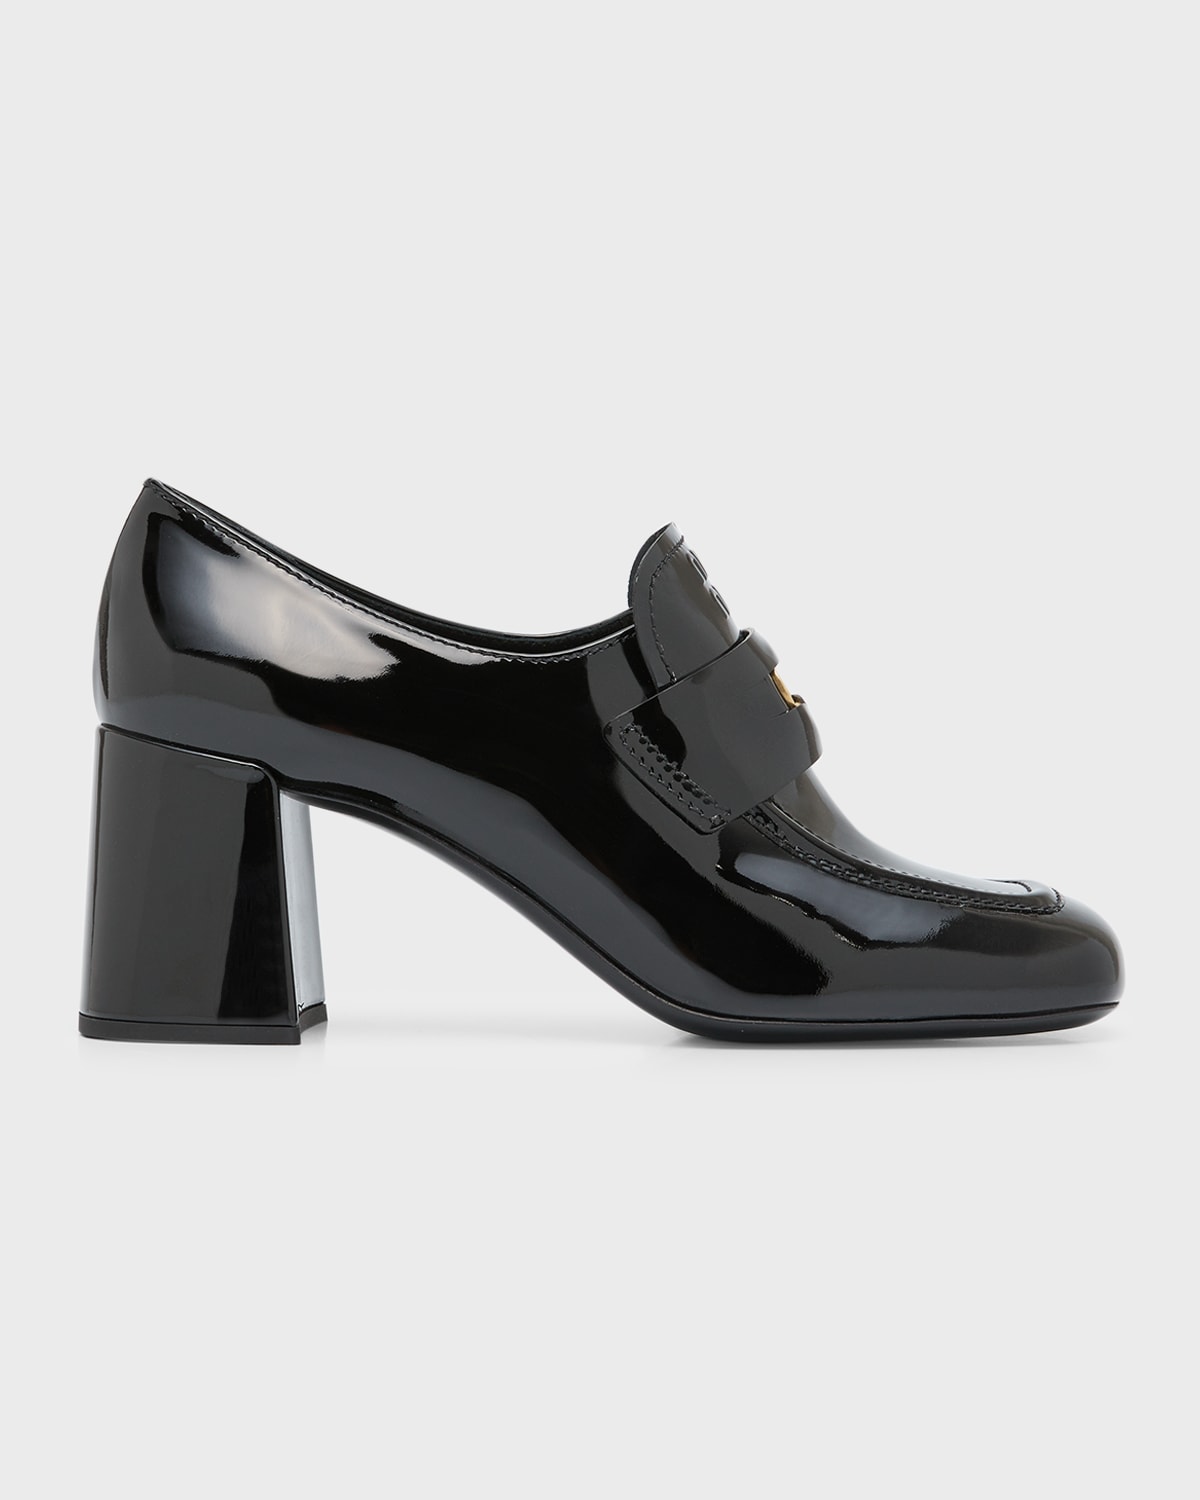 Miu Miu Patent Leather Heeled Penny Loafers In Nero